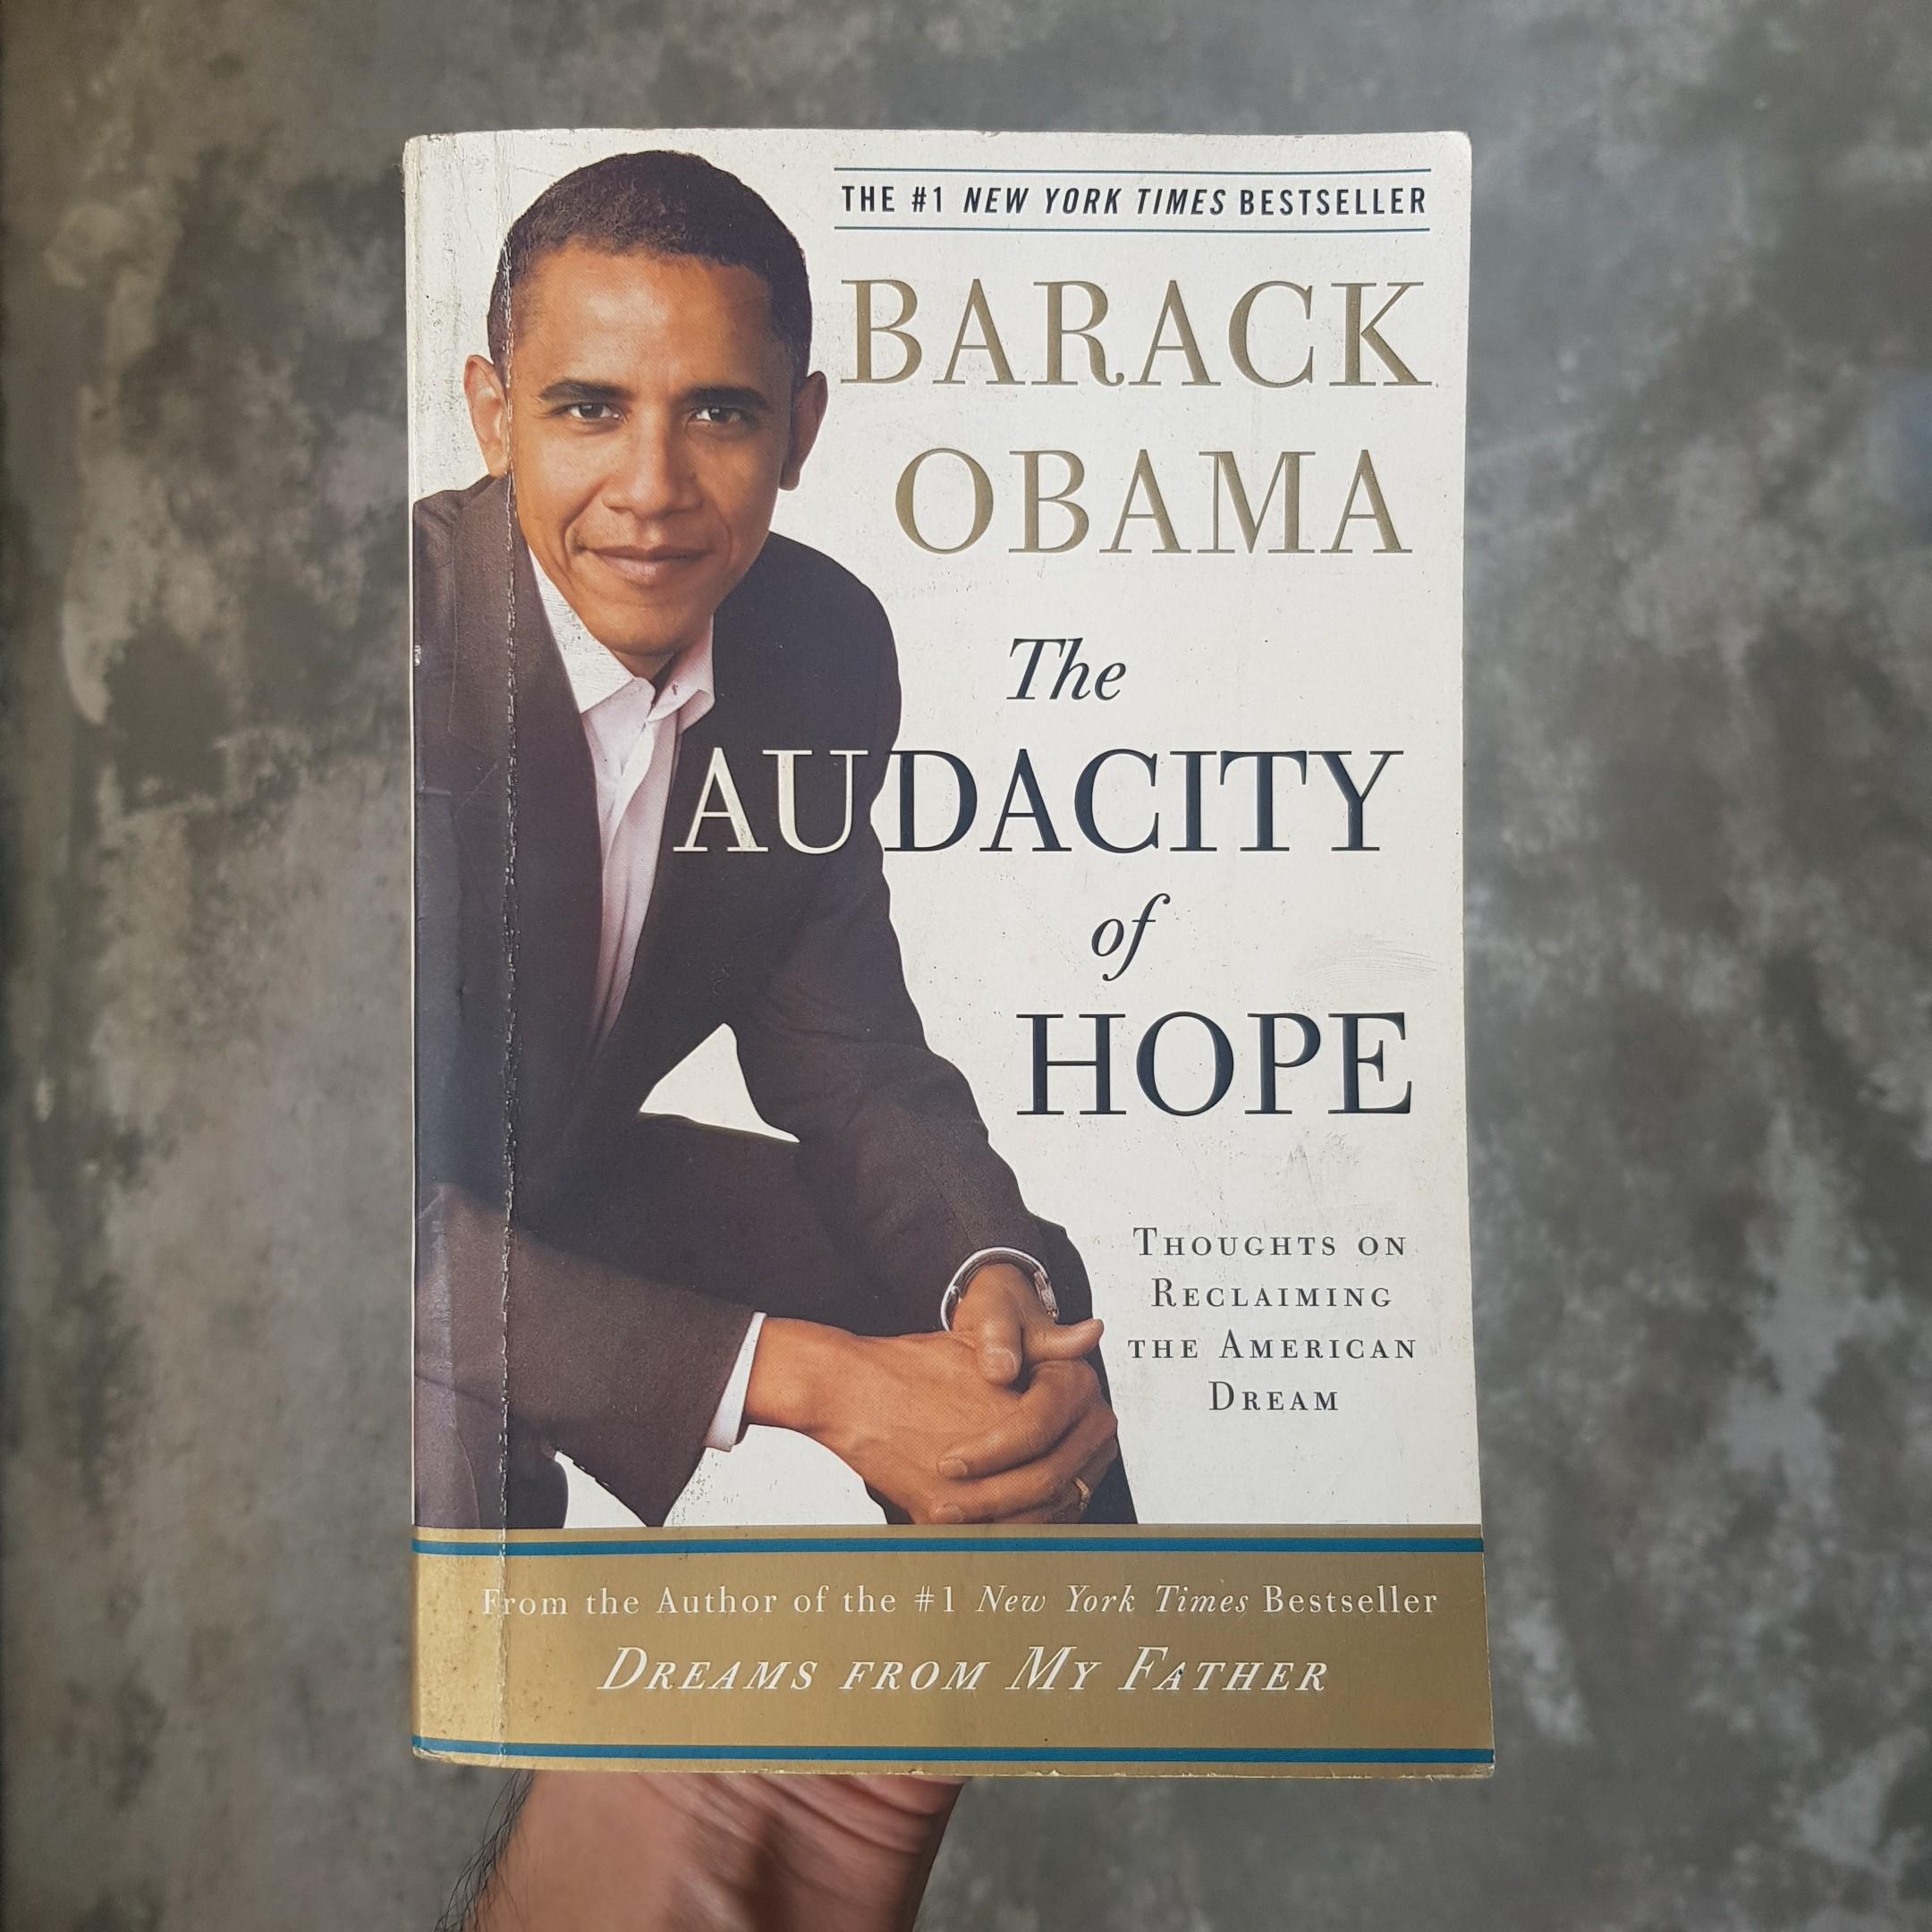 The audacity of hope: Thoughts on reclaiming the American dream